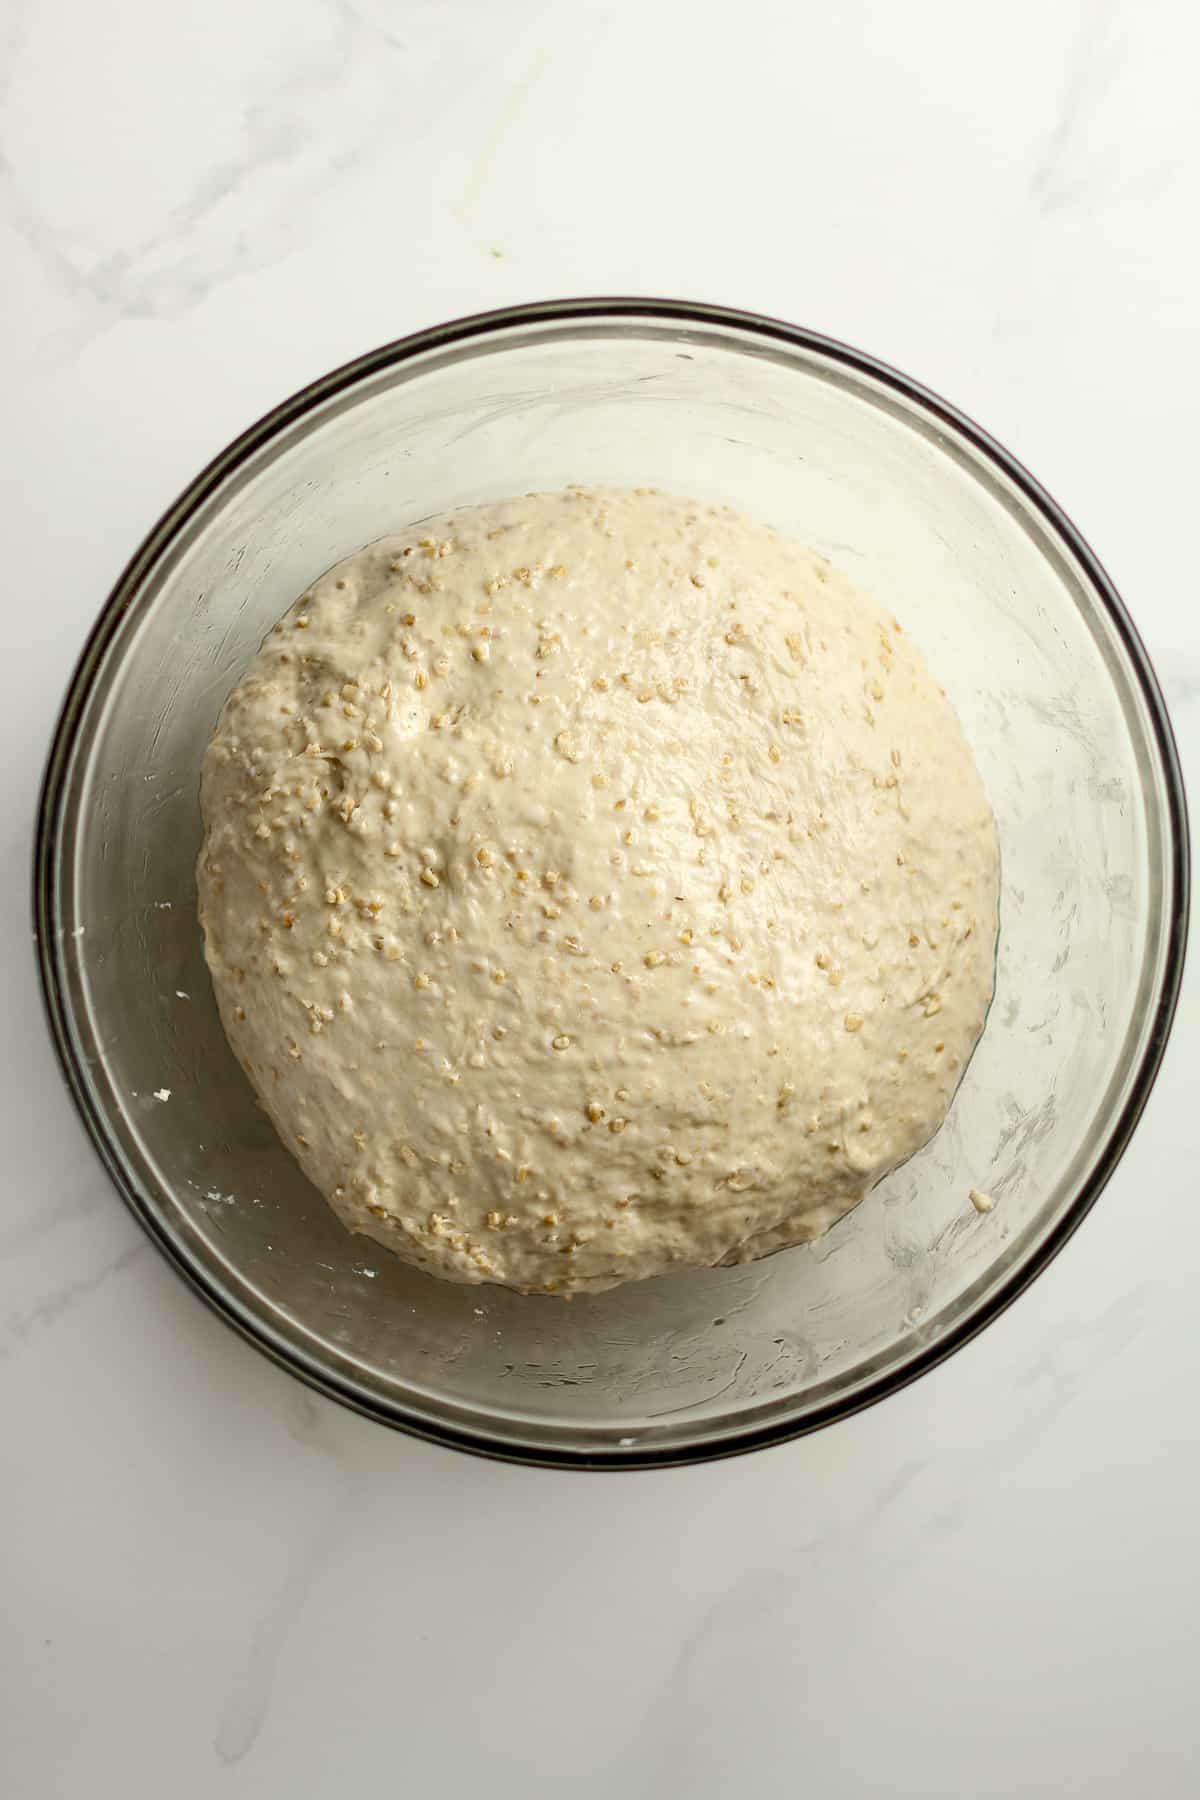 A bowl of the dough after mixing.